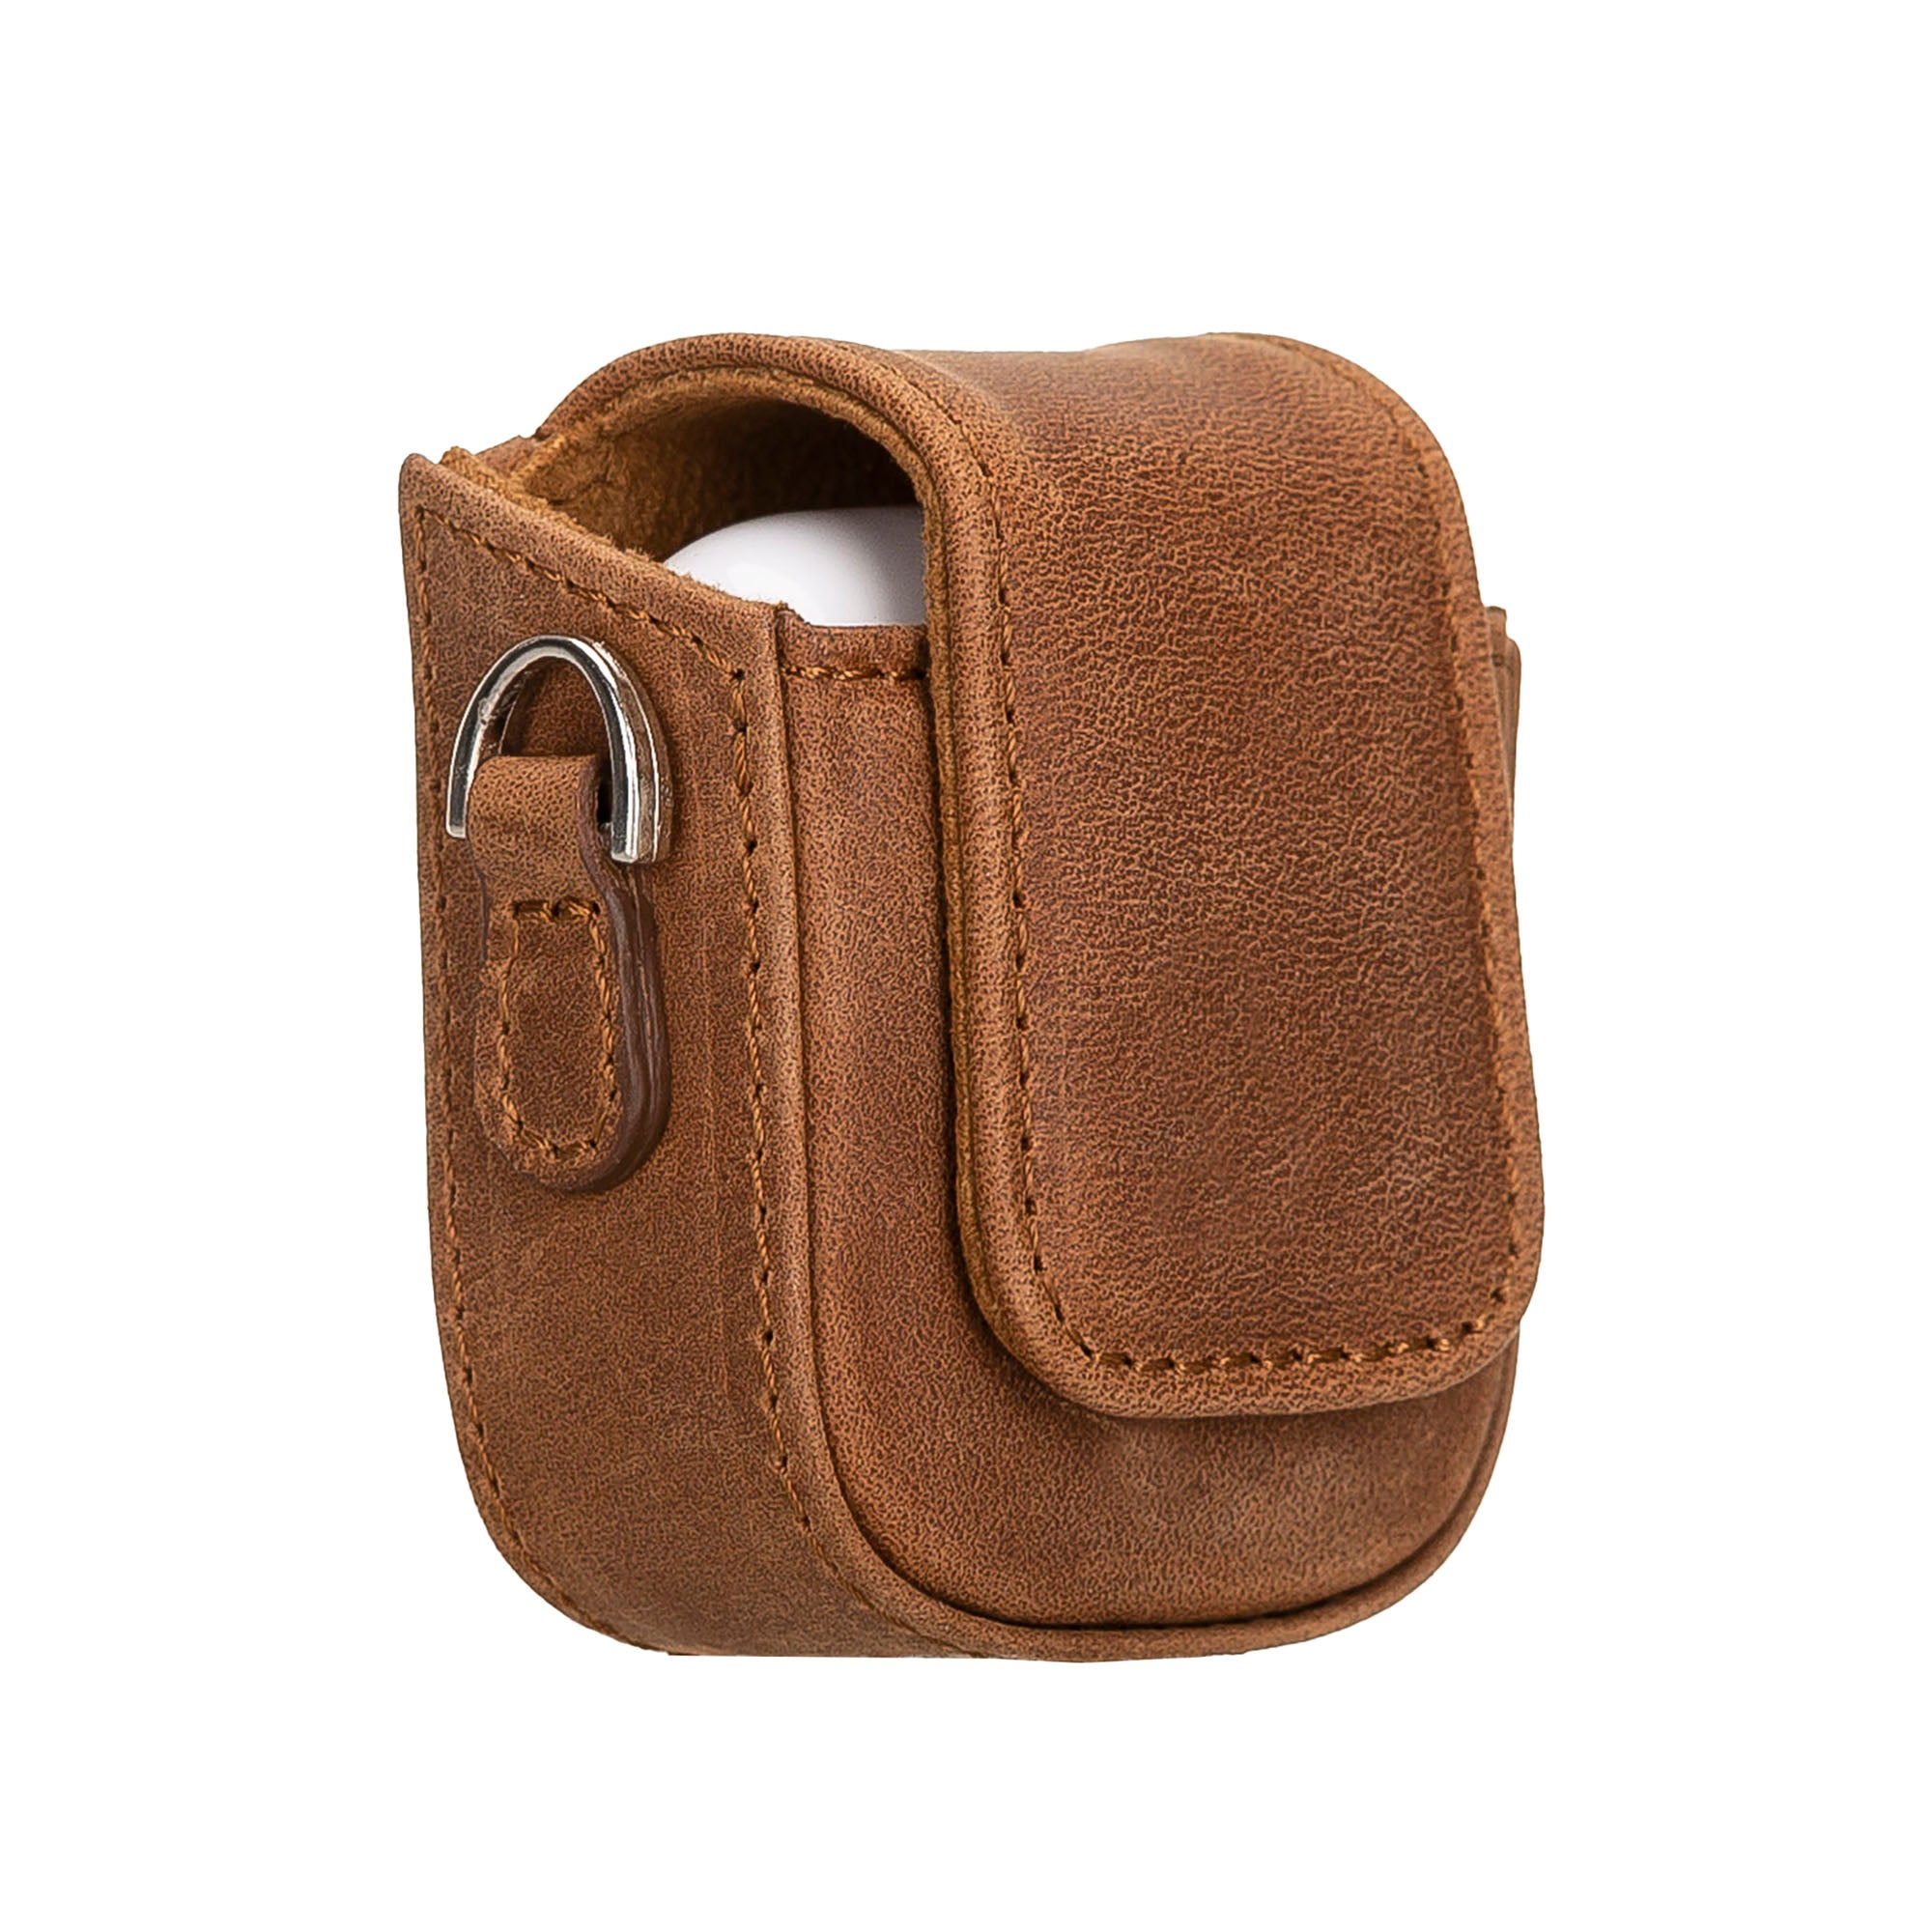 Jojo Leather Case for AirPods 1 & 2 - BROWN - saracleather